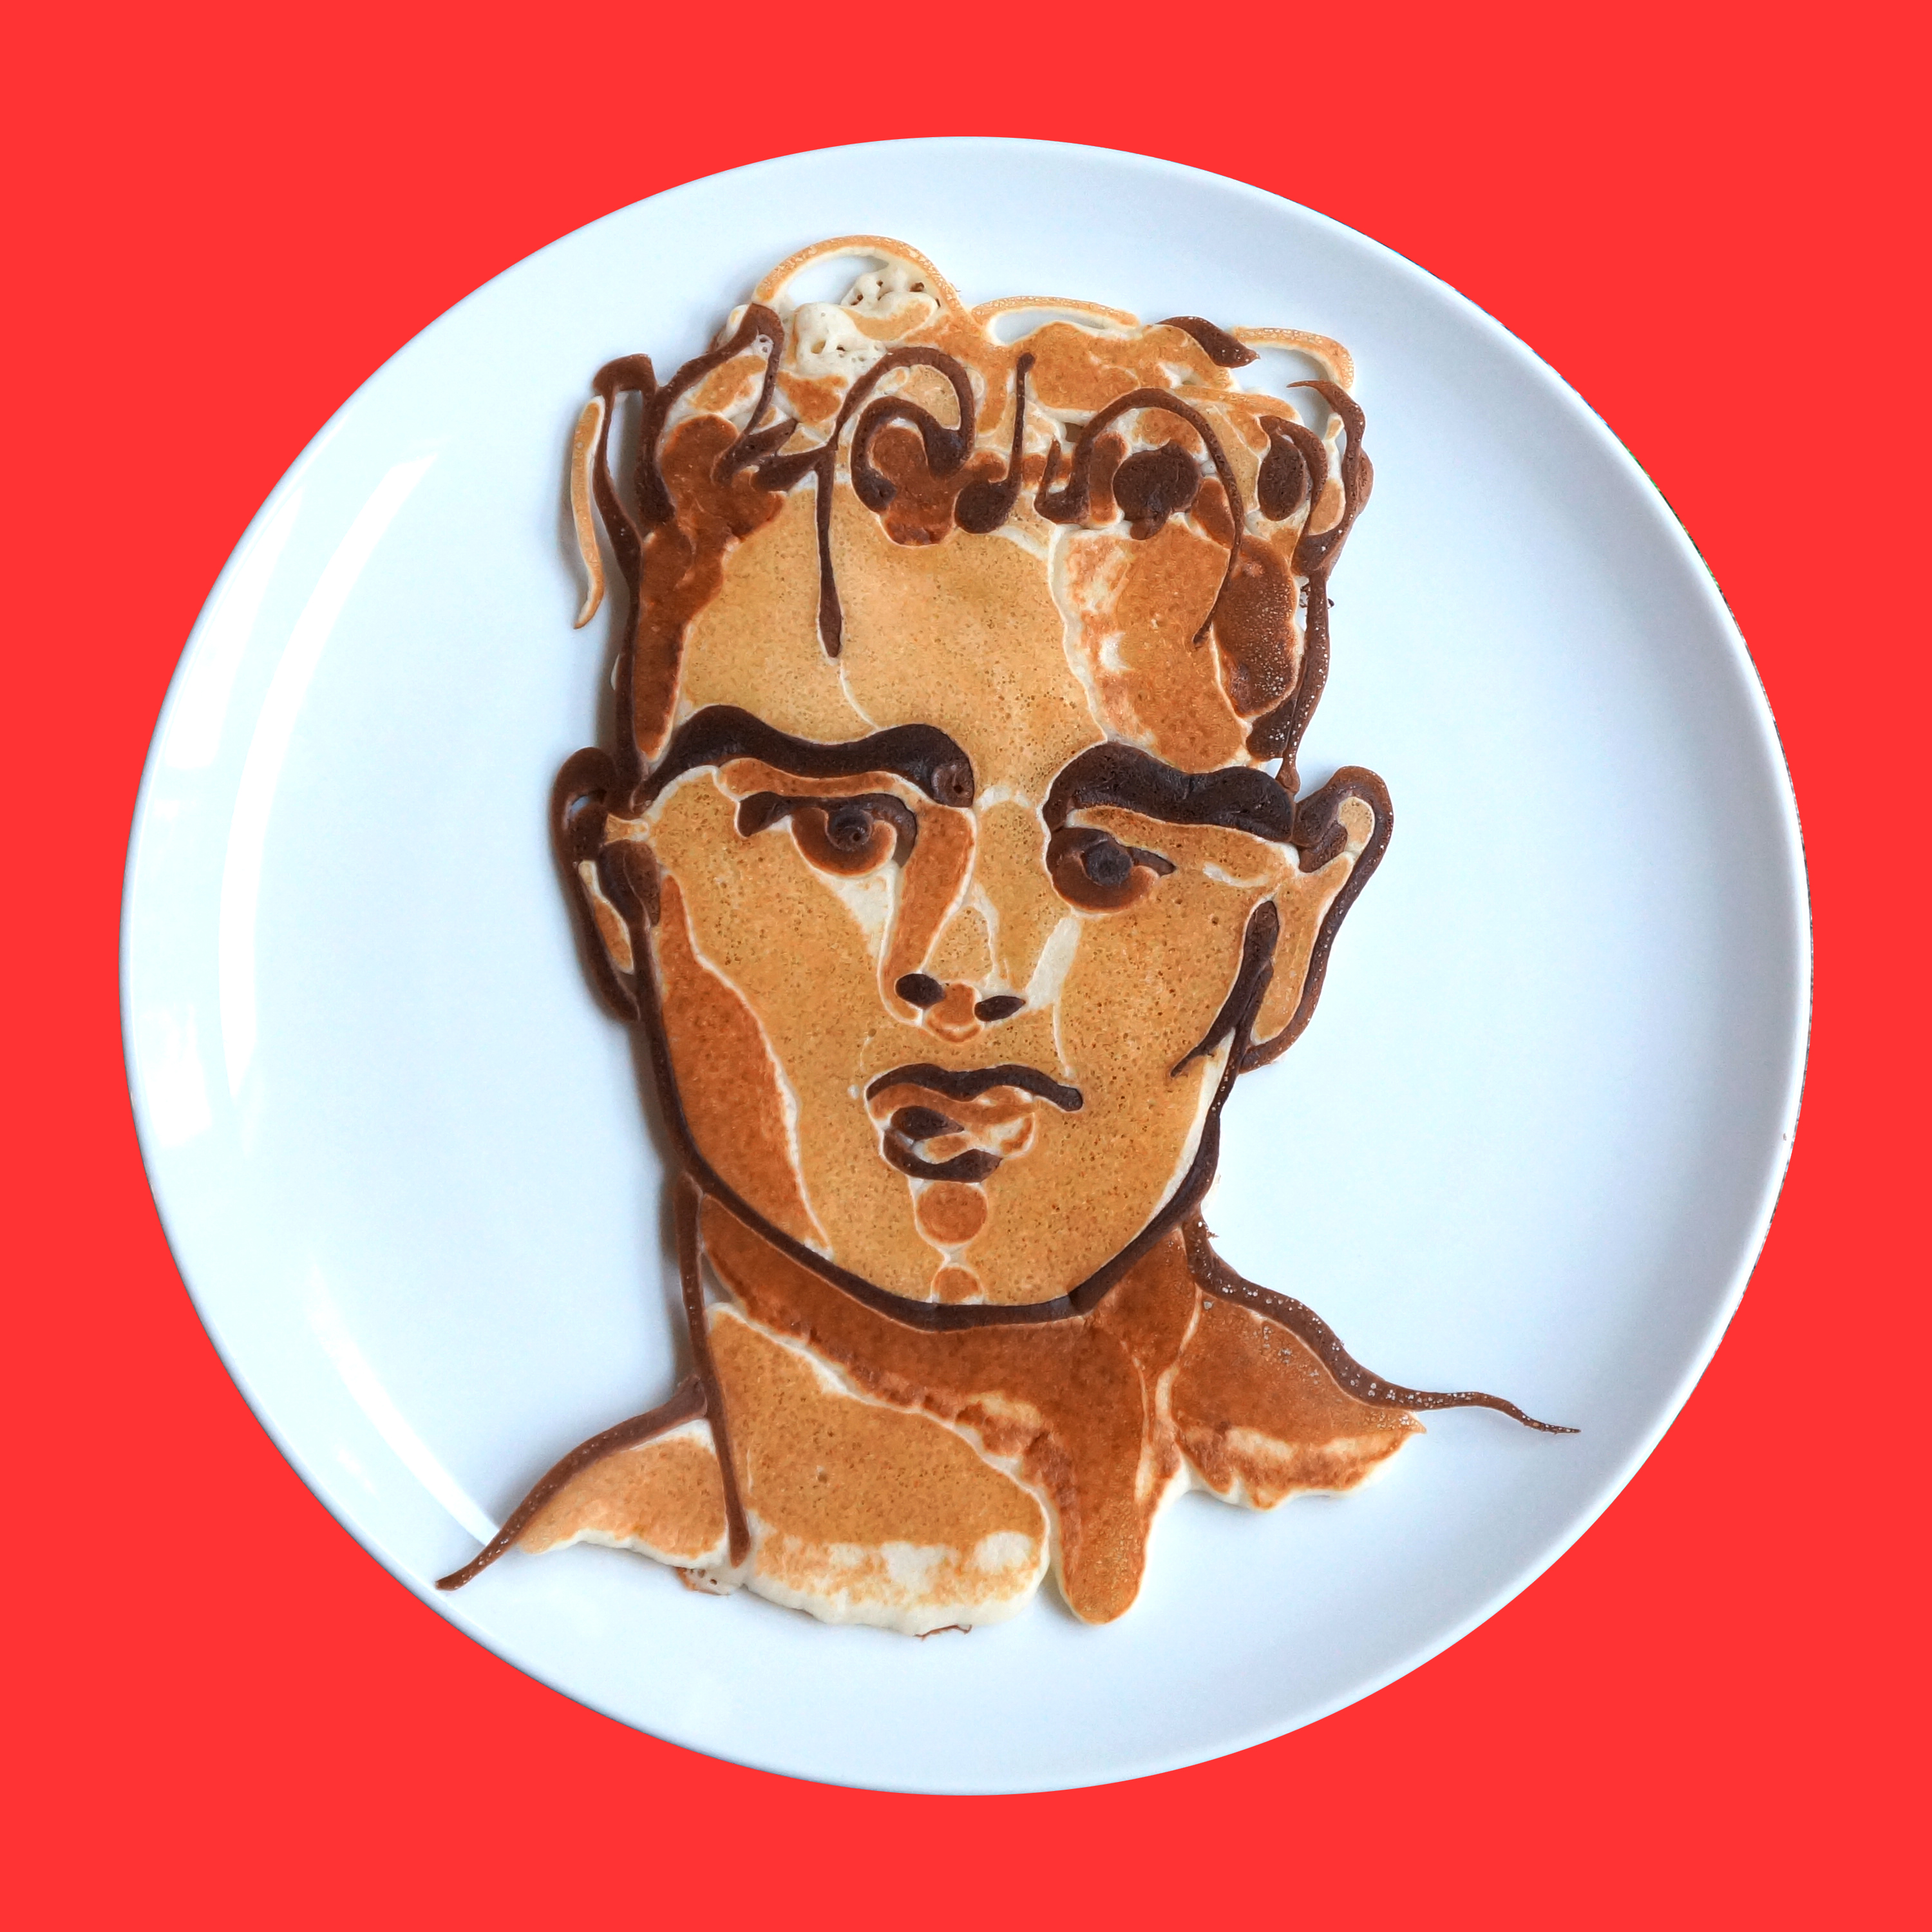 Nathan Shields creates pancake portraits of famous faces for NOW TV, Zac Effron from Baywatch